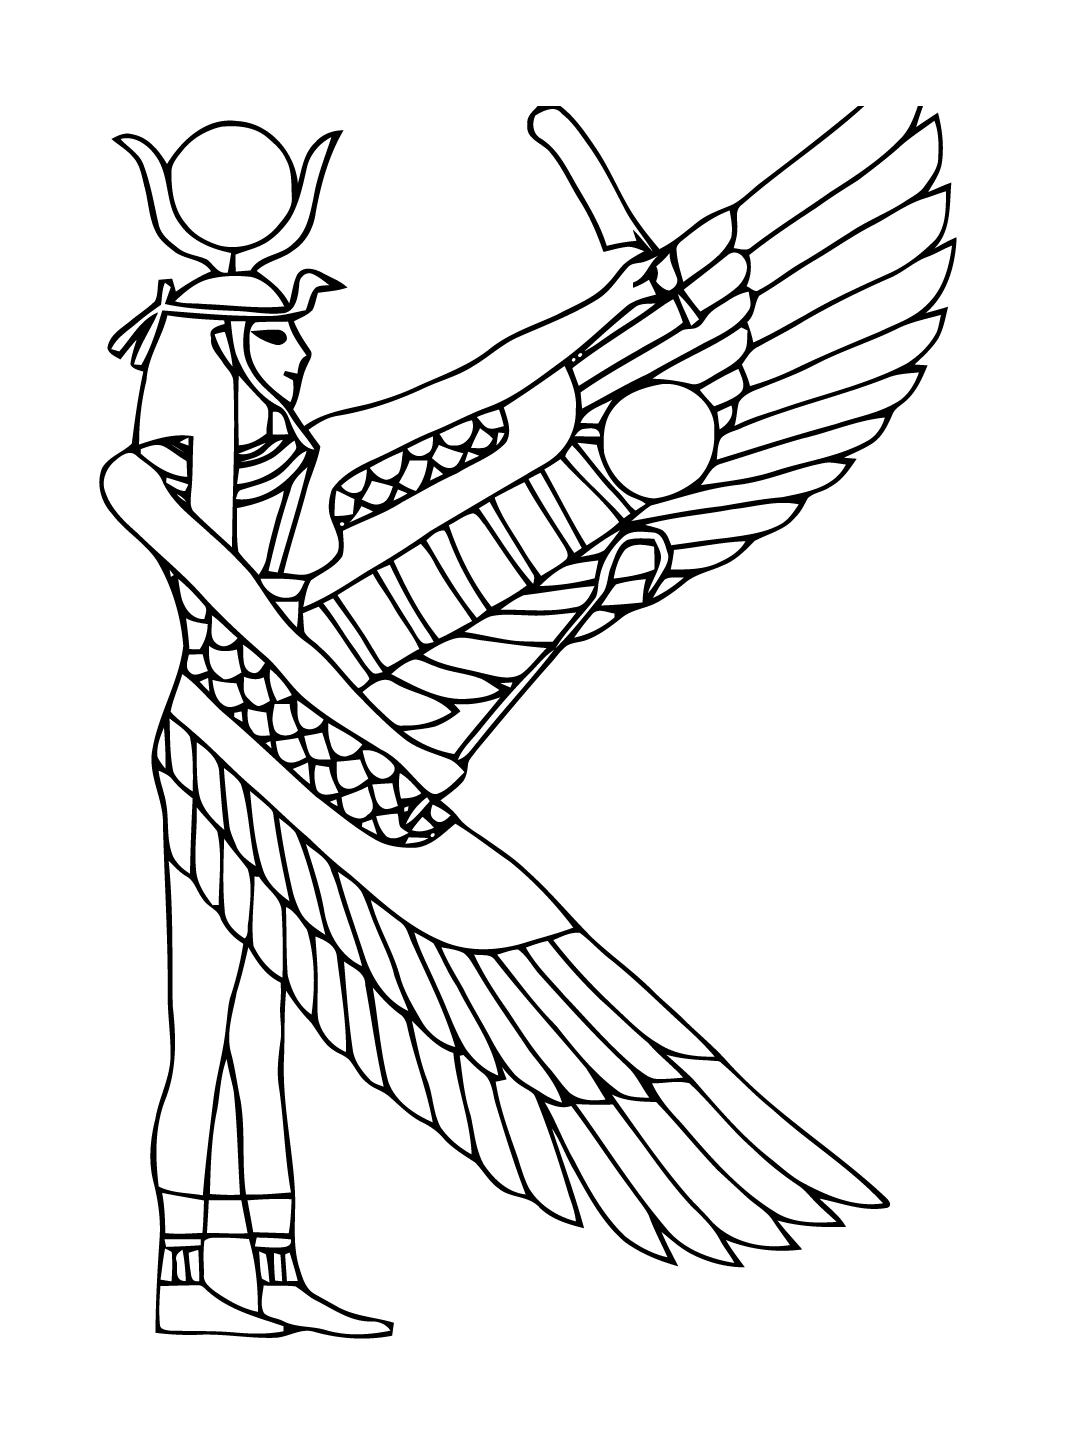 egypt coloring pages ancient egypt coloring pages to download and print for free egypt coloring pages 